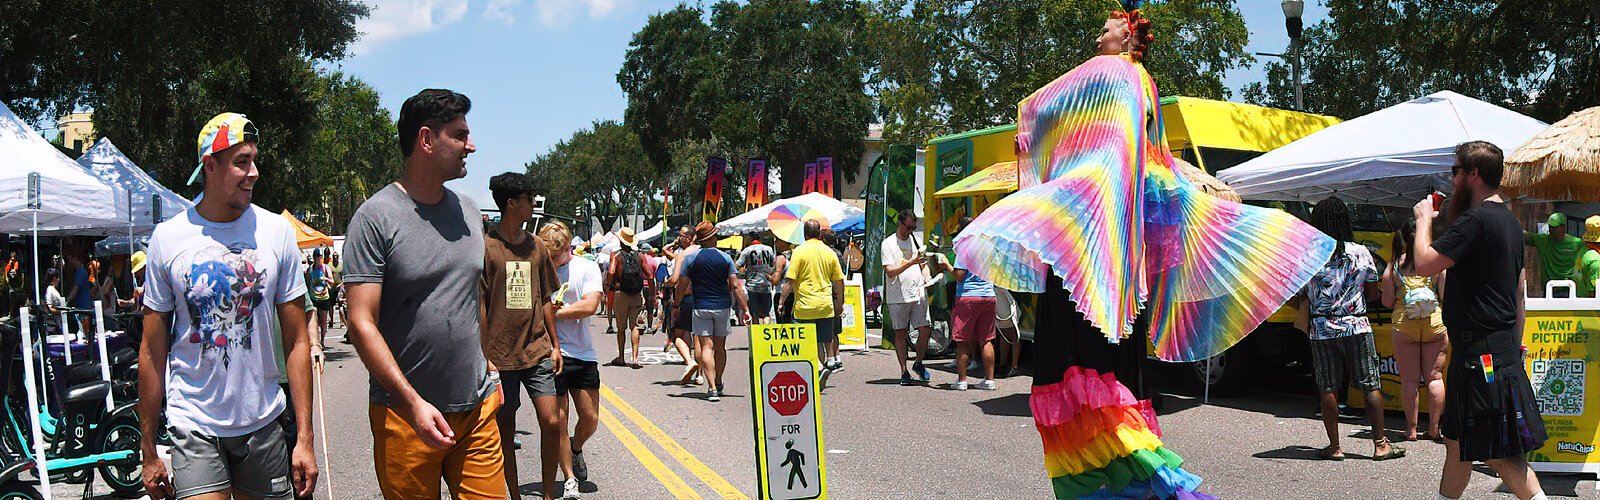 St Pete entertainer Maggie Soluna catches the eyes of Pride-goers with her skilled stilt-walking and rainbow attire.